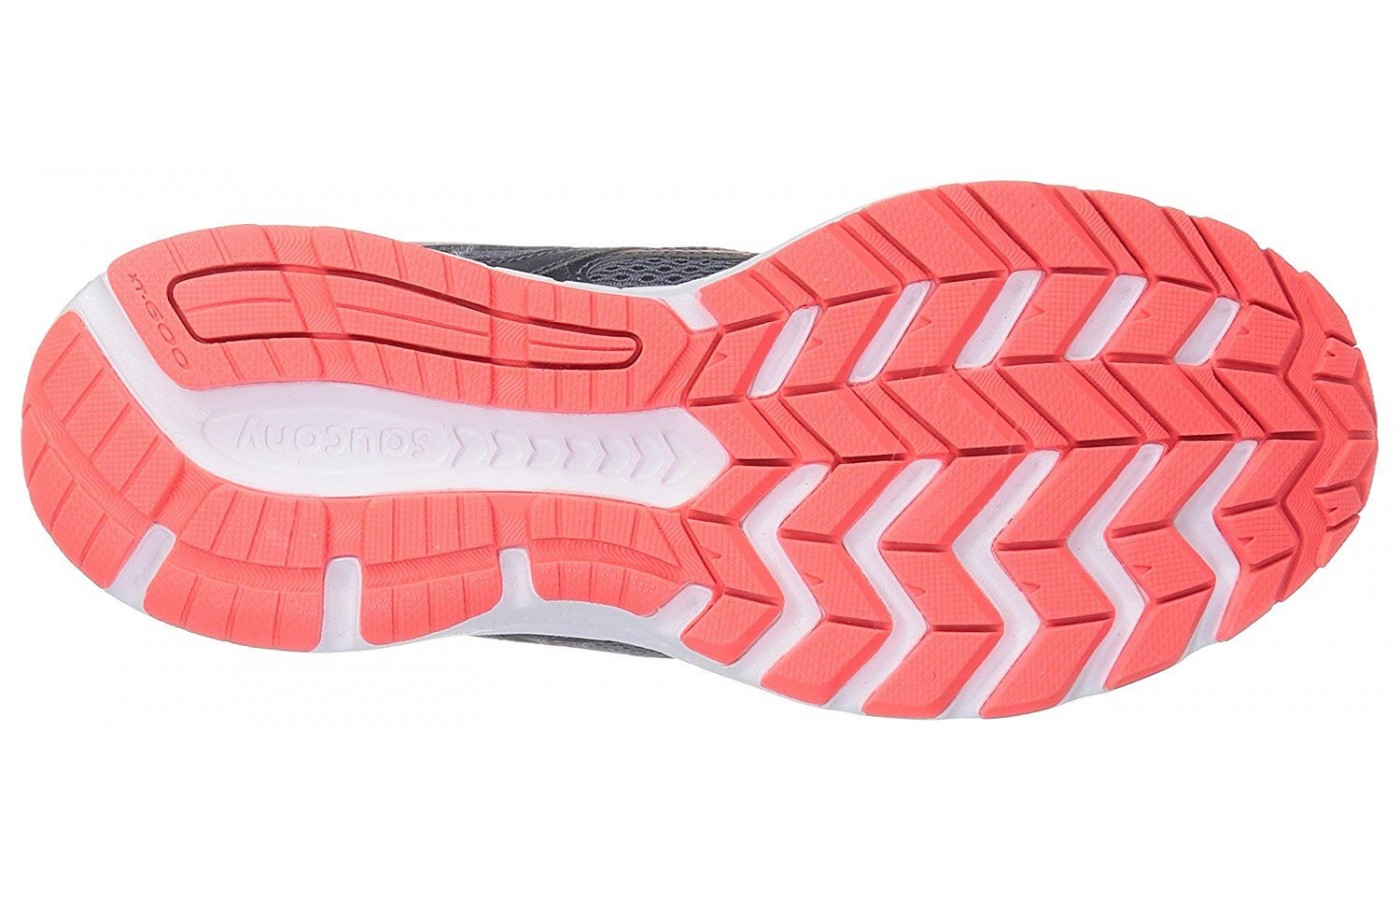 The Saucony Cohesion 11 features a rubber outsole